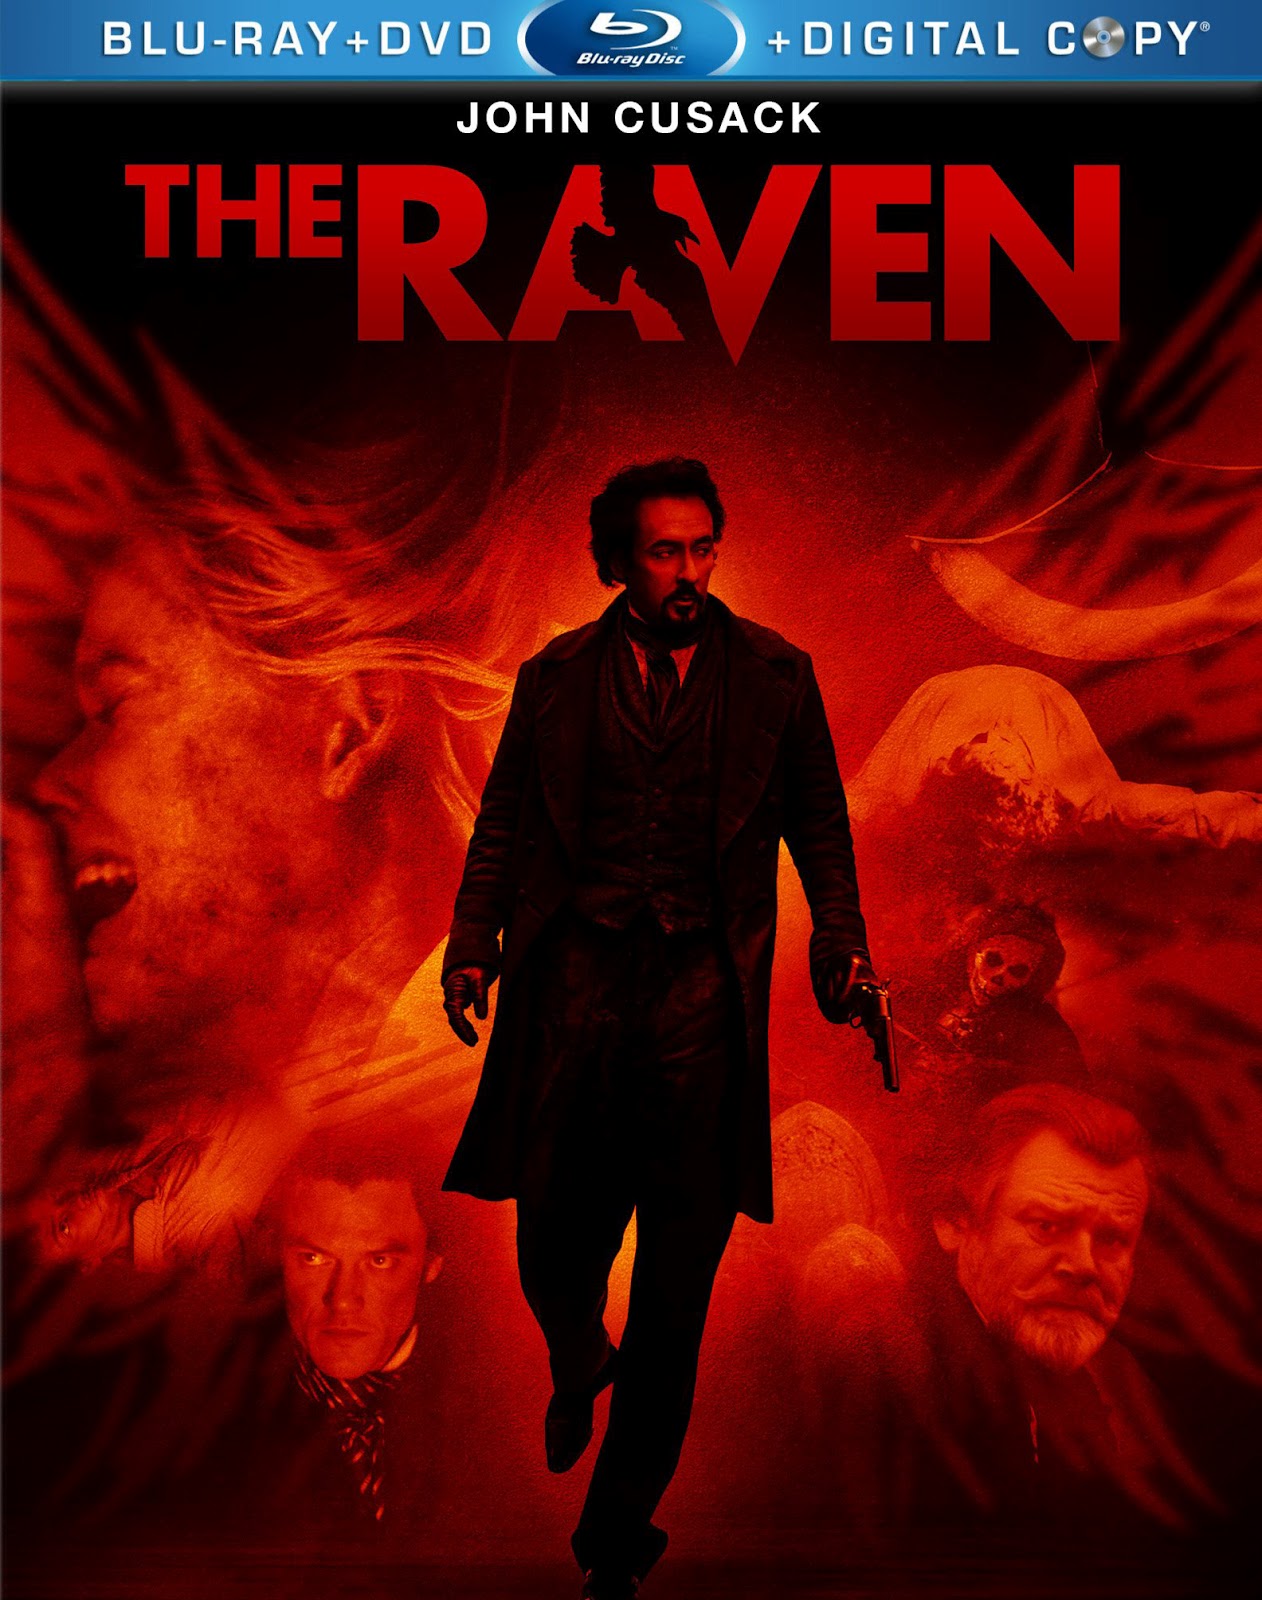 THE RAVEN Available on Blu-ray/DVD October 9th